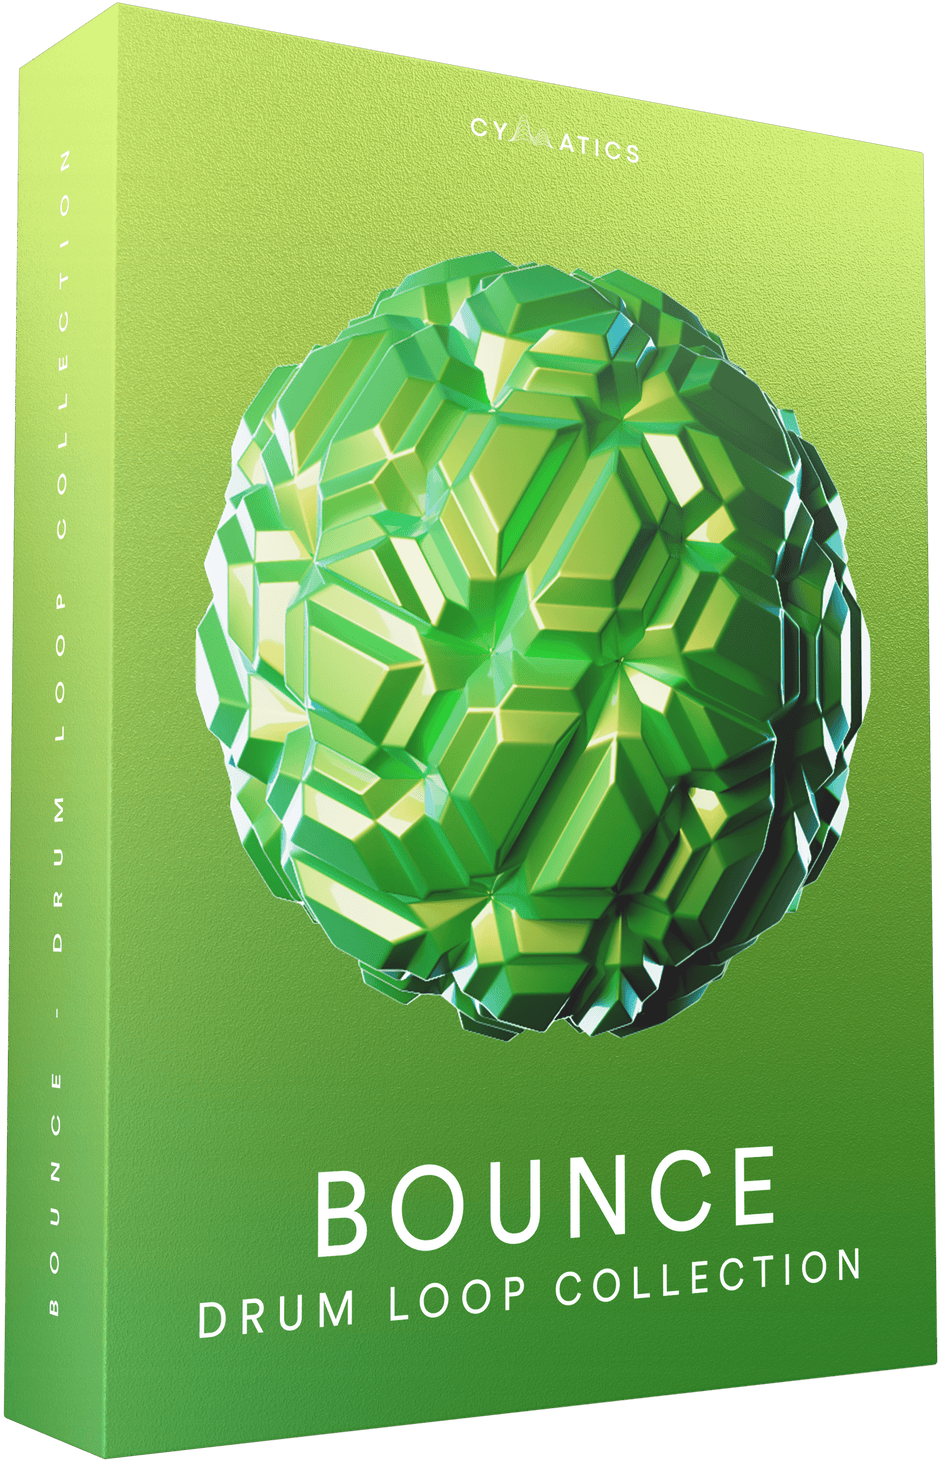 Bounce: Drum Loop Collection